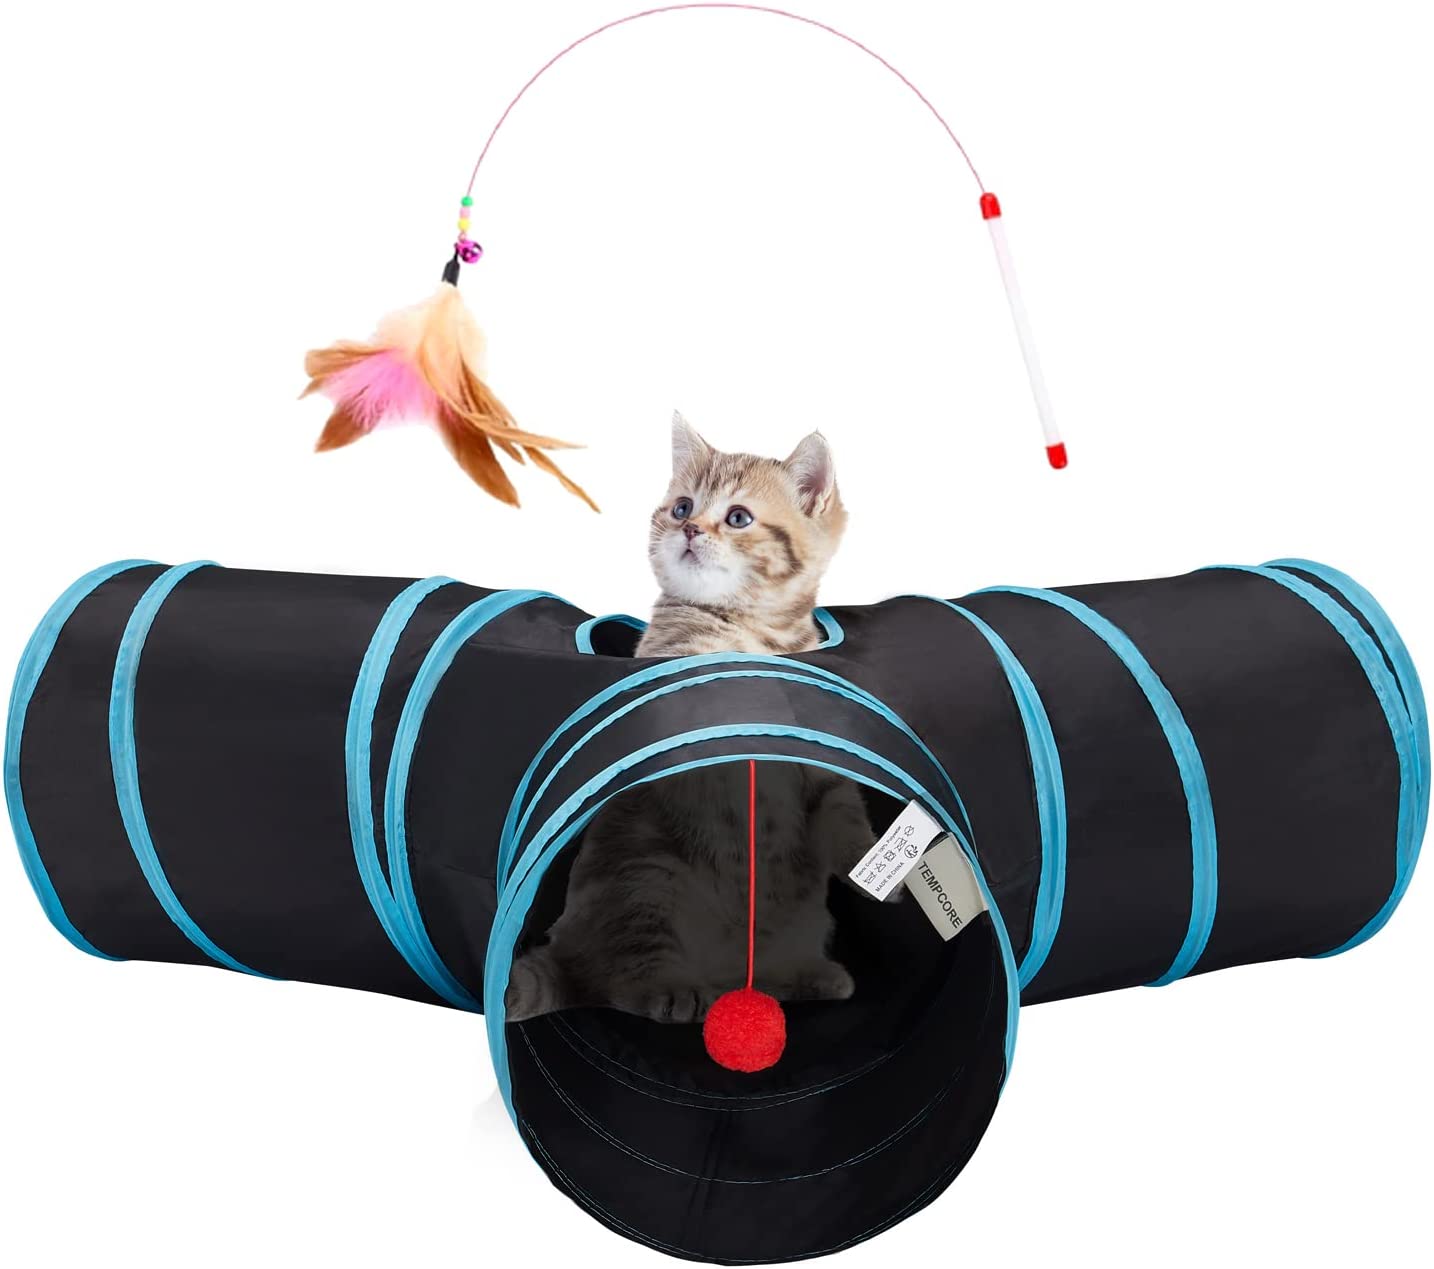 Hot Sale 3 Channels Collapsible Cat Tunnel Tube Toy With Ball Featured Image